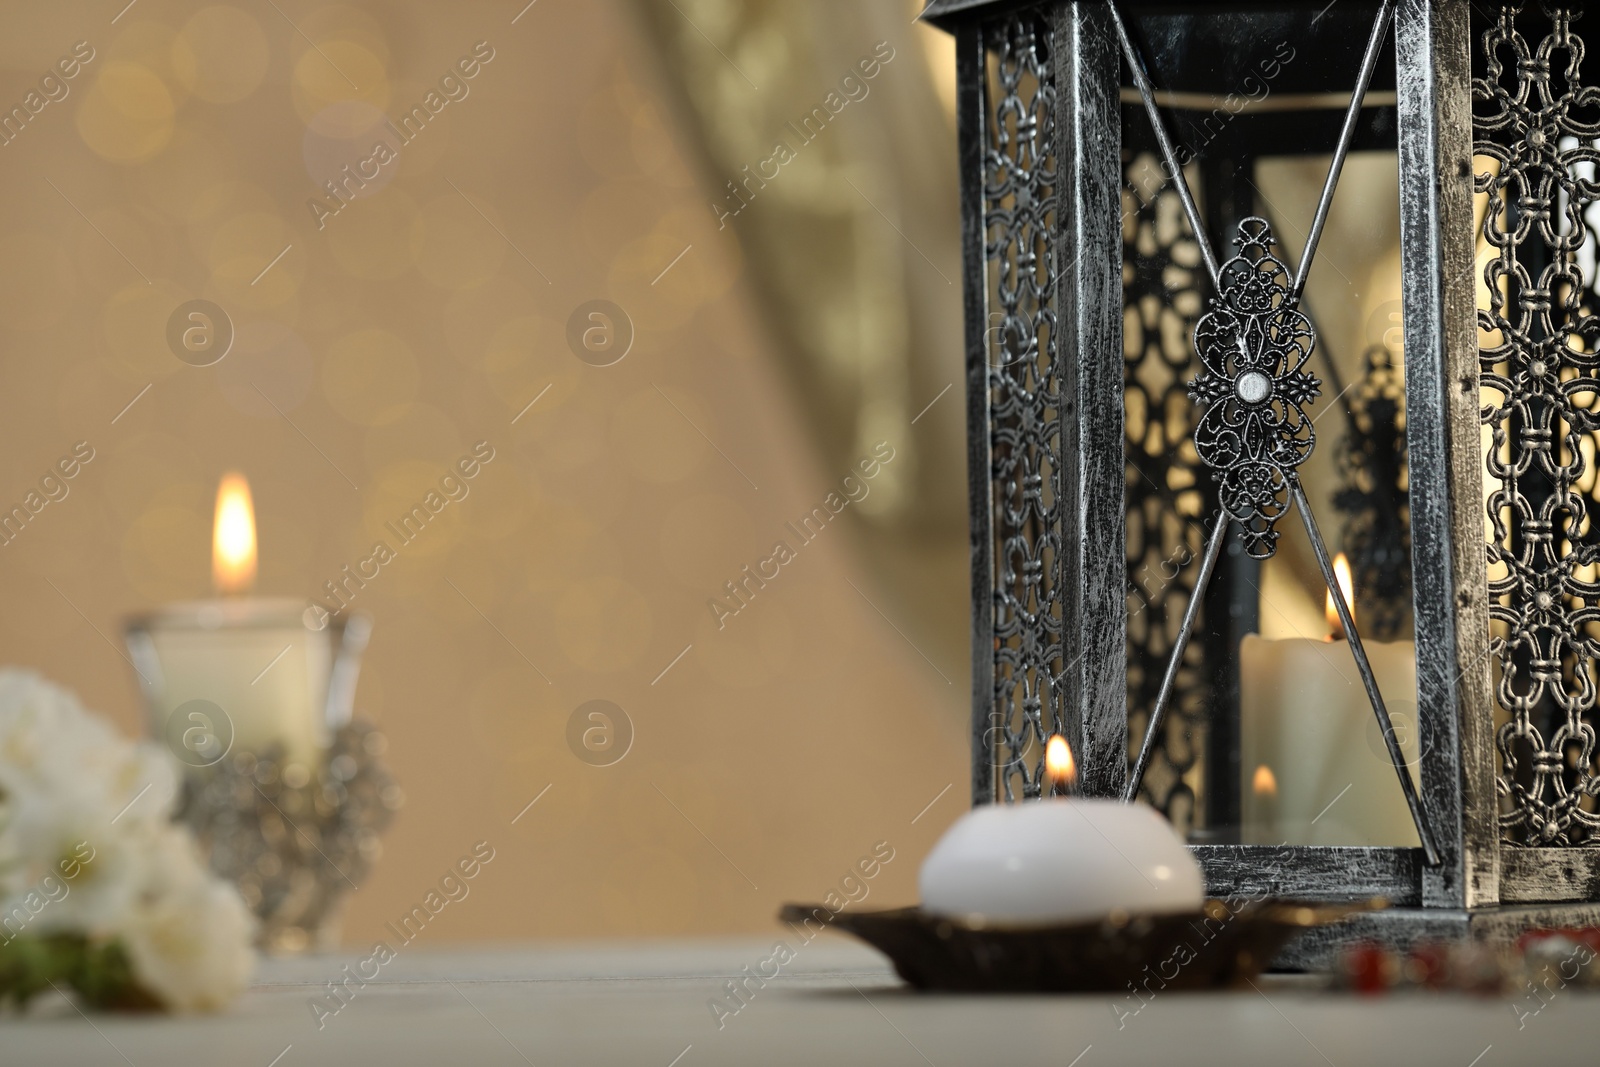 Photo of Arabic lantern and burning candles on table against blurred lights